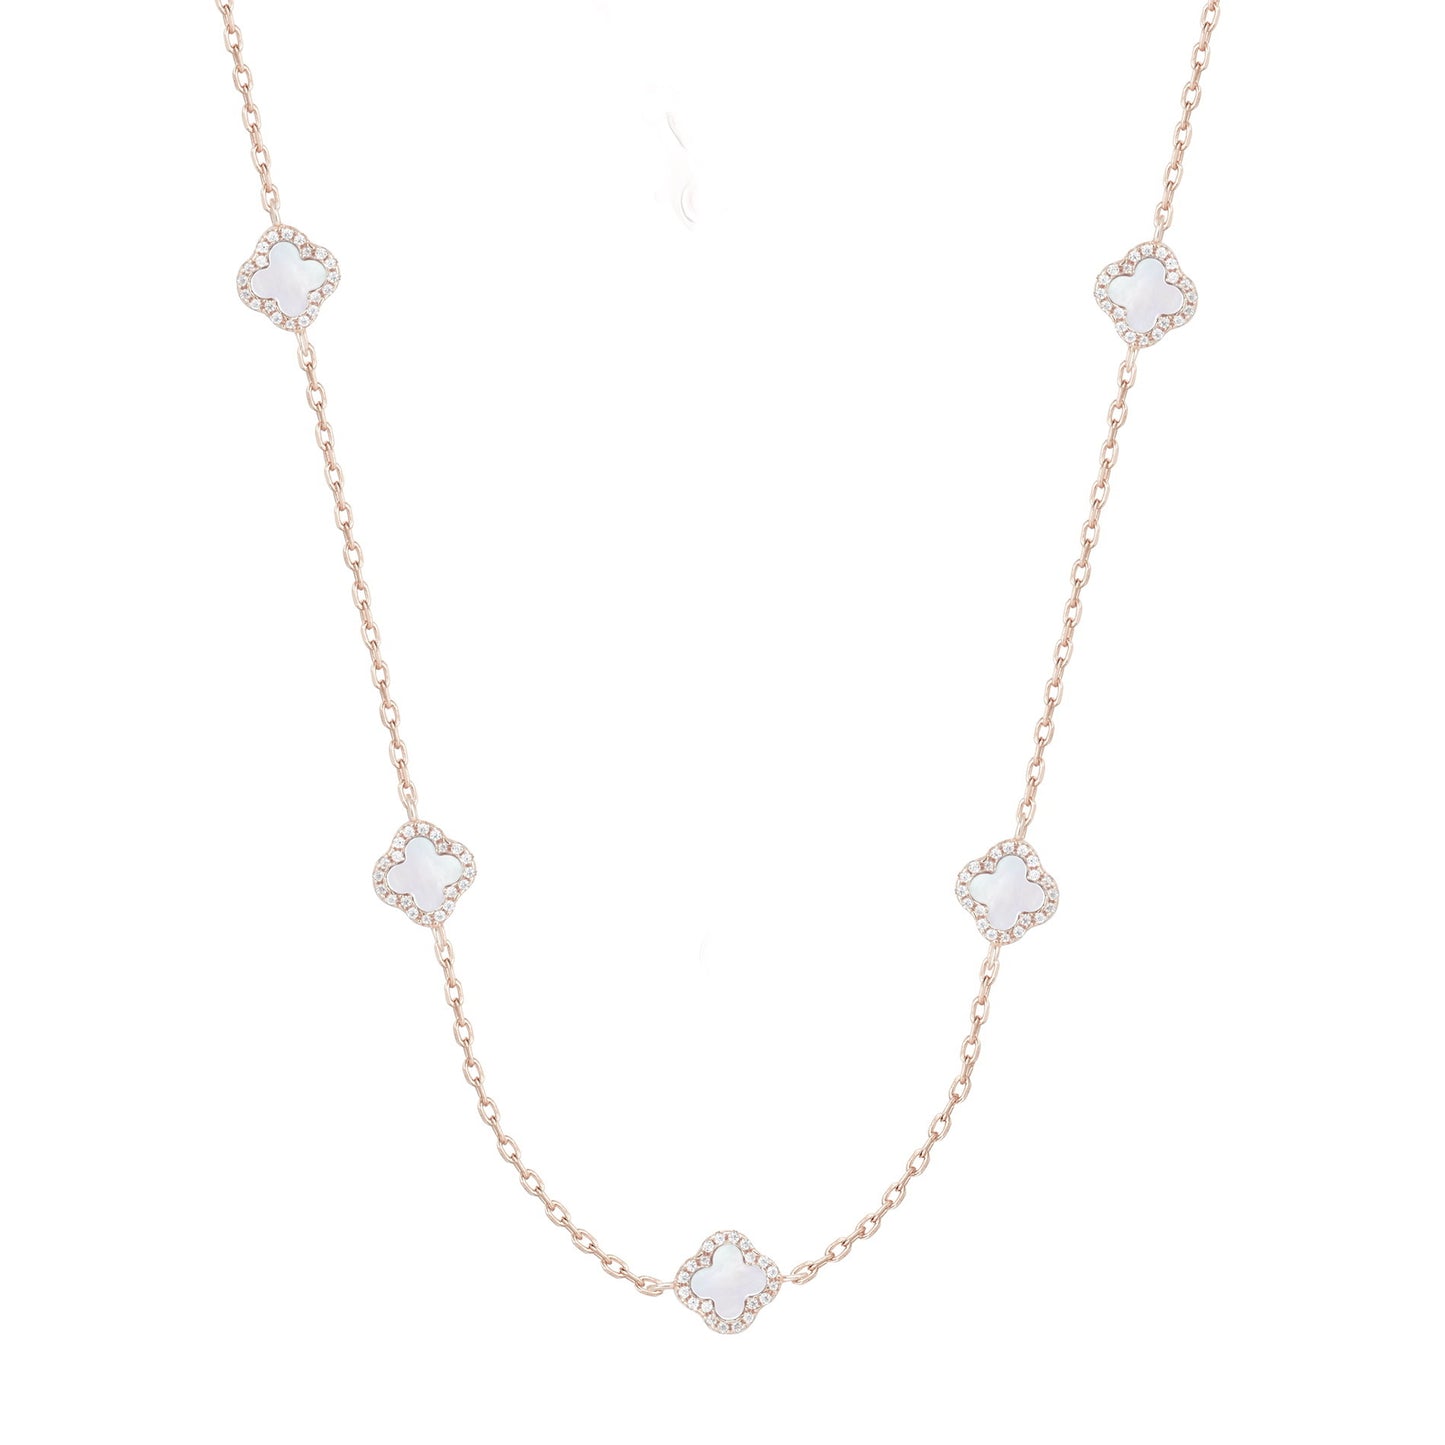 KIARA MINI MOTHER OF PEARL FIVE CLOVER ROSE GOLD NECKLACE